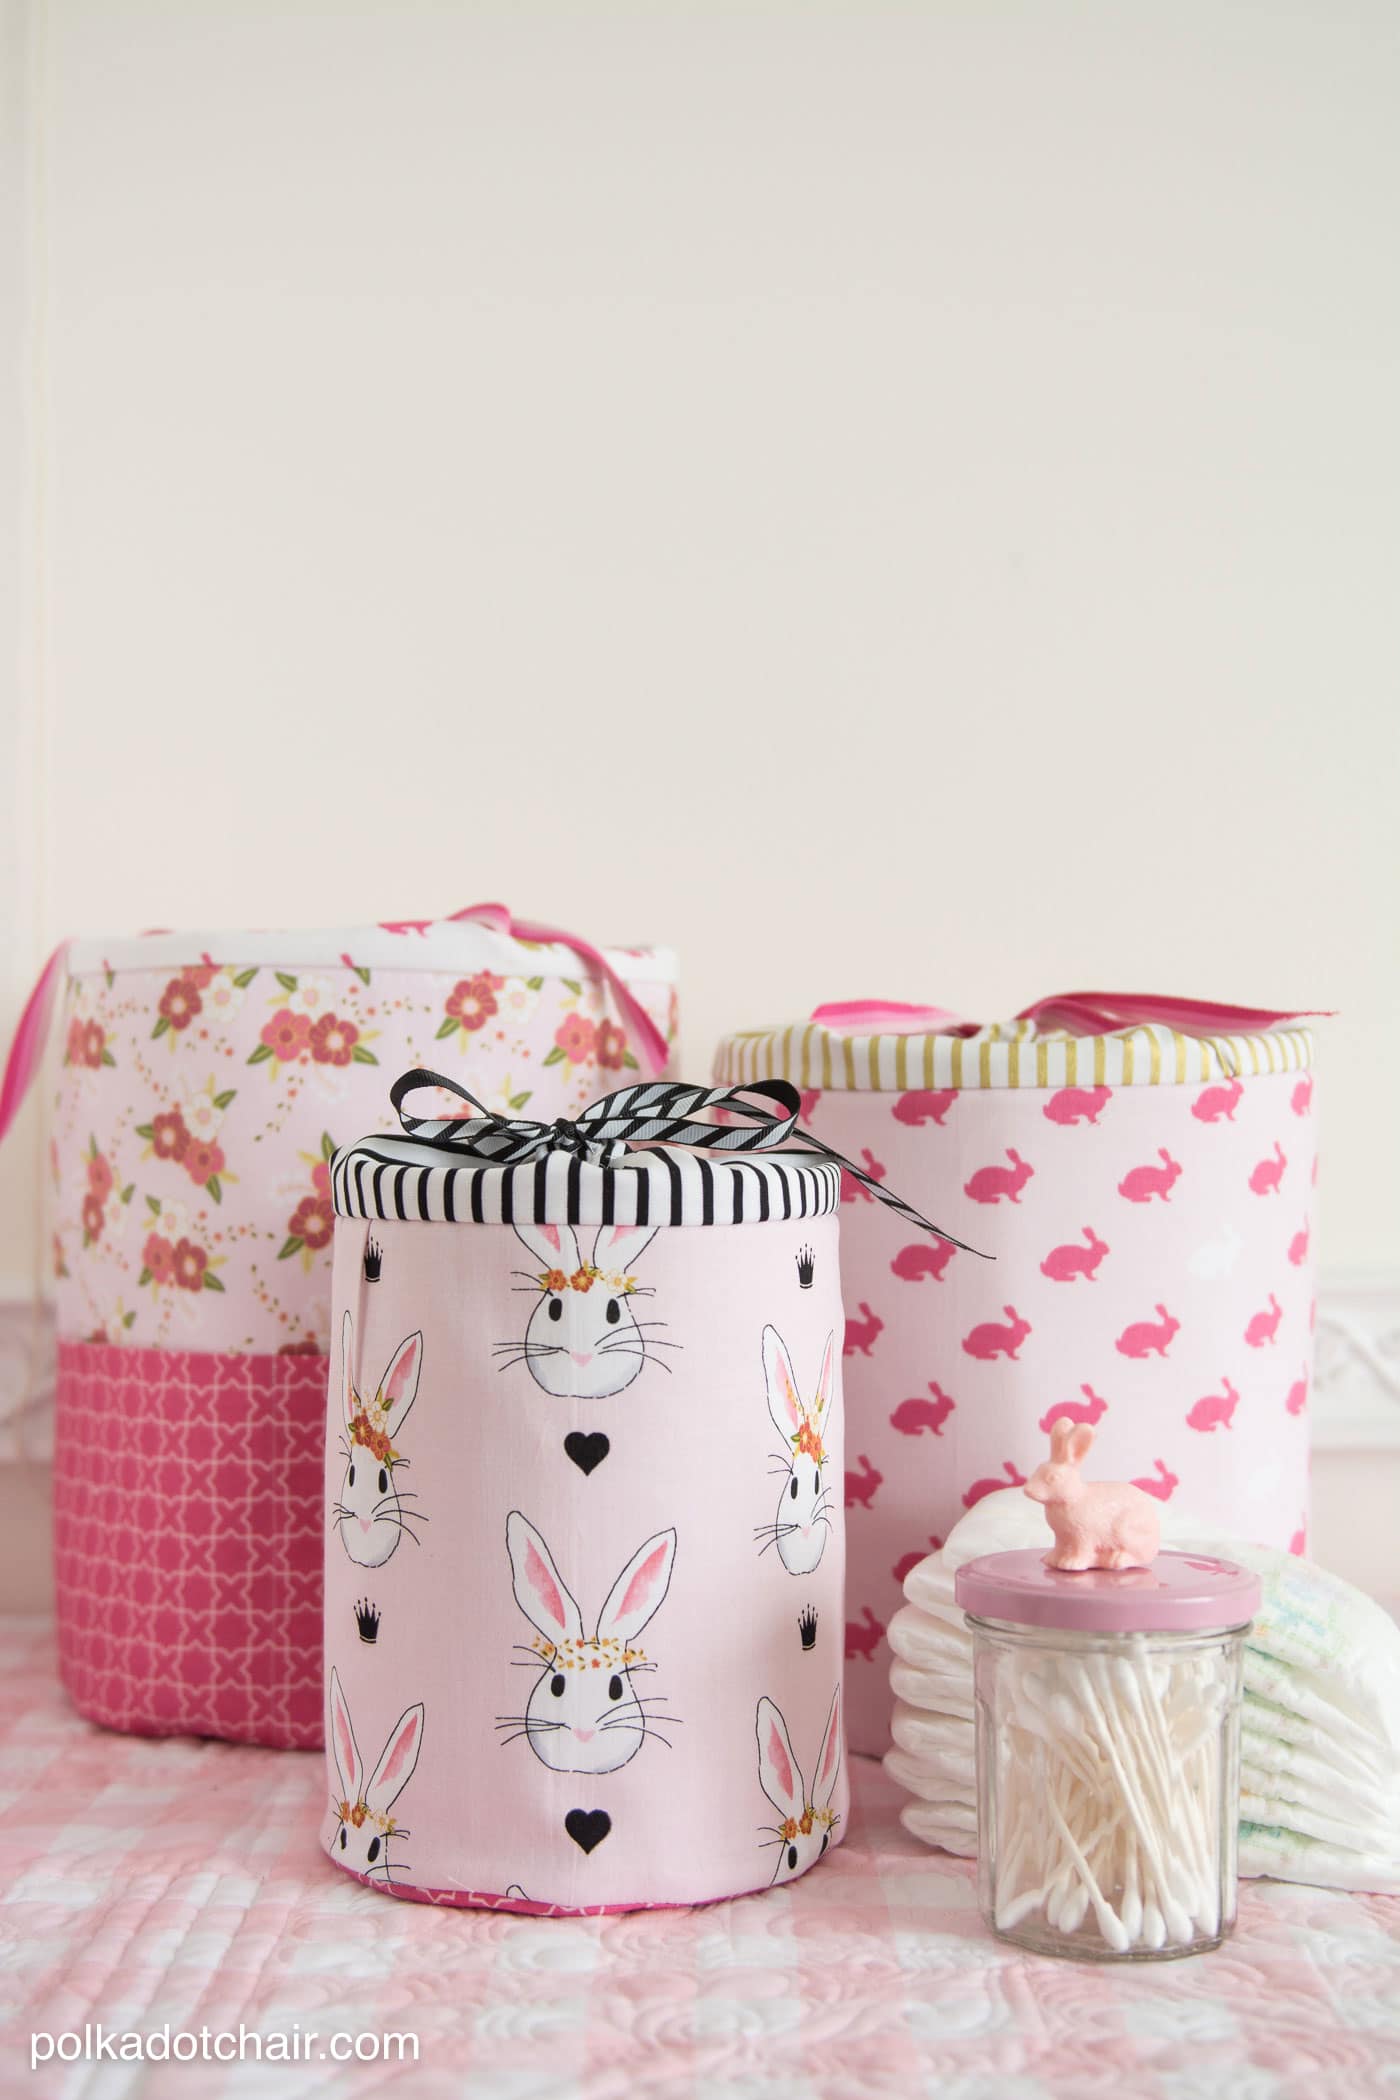 Padded Storage Cases; sewing pattern by polkadotchair.com 